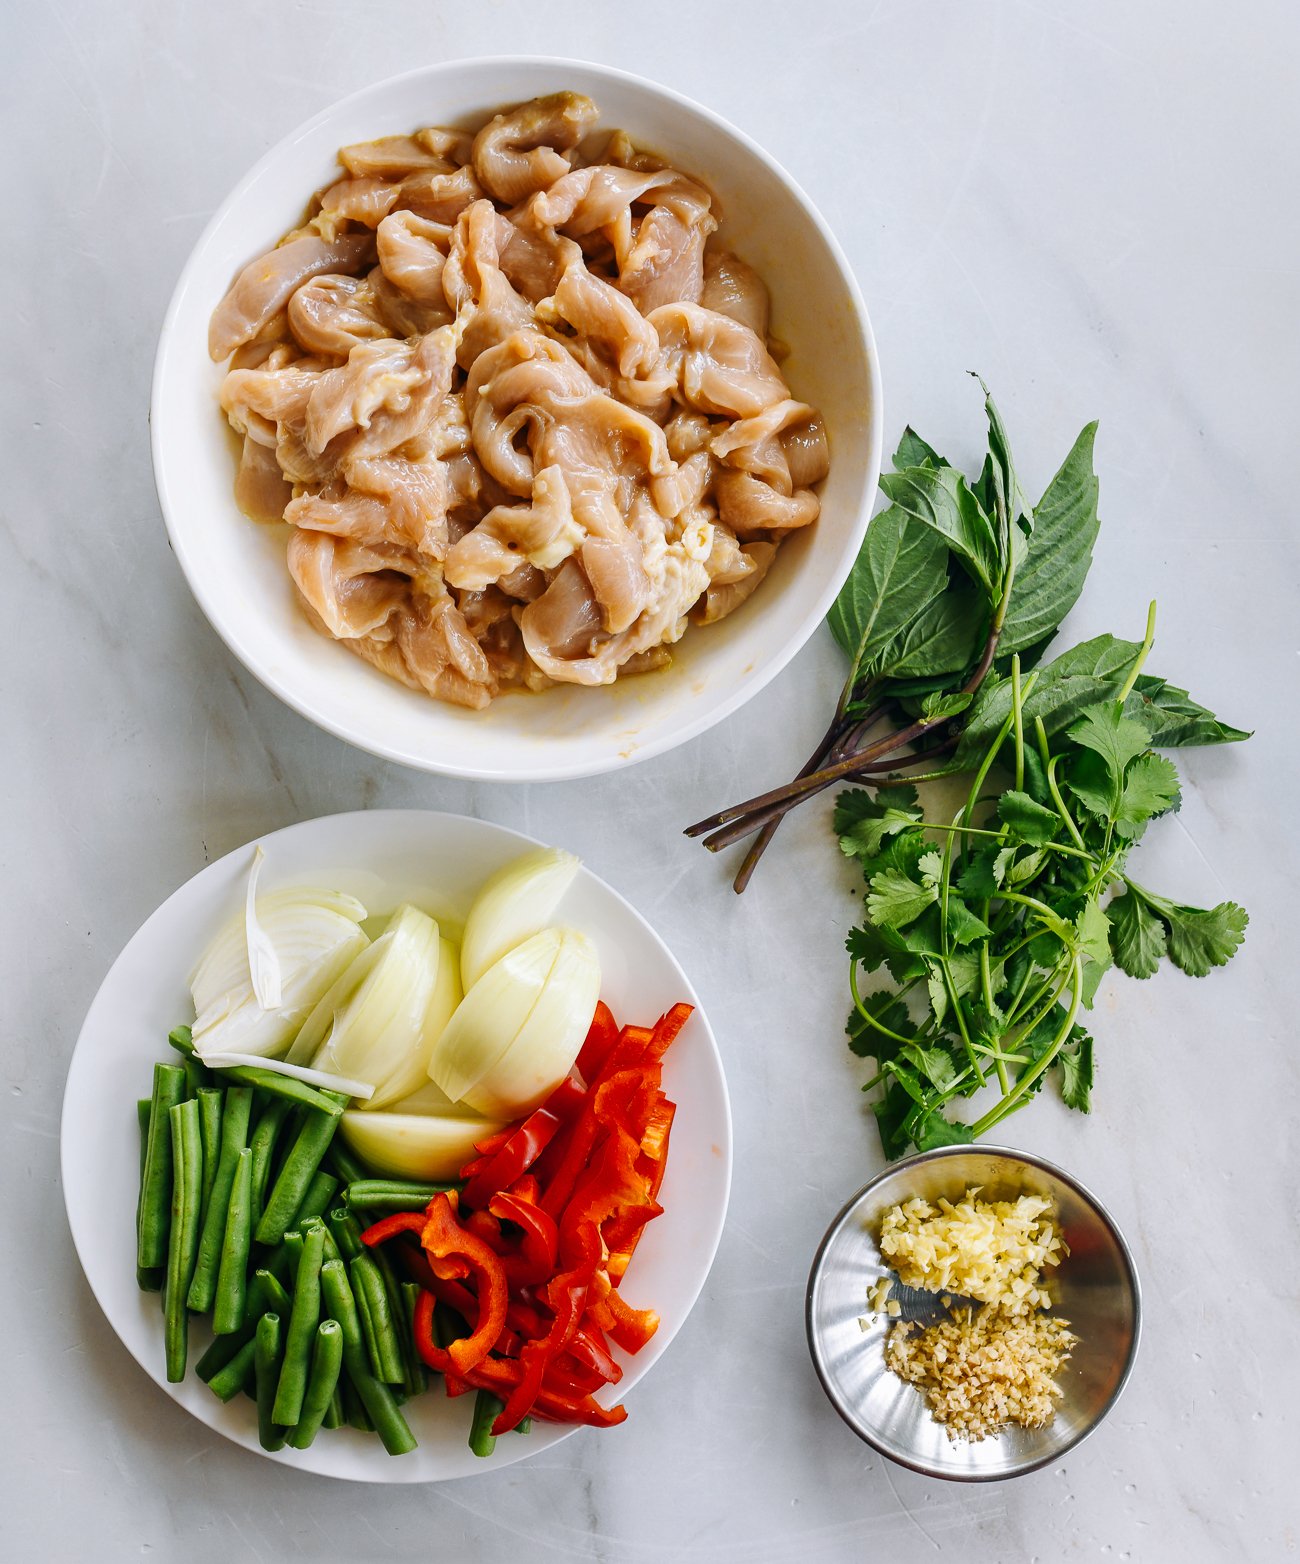 Ingredients for Thai Red Curry Chicken